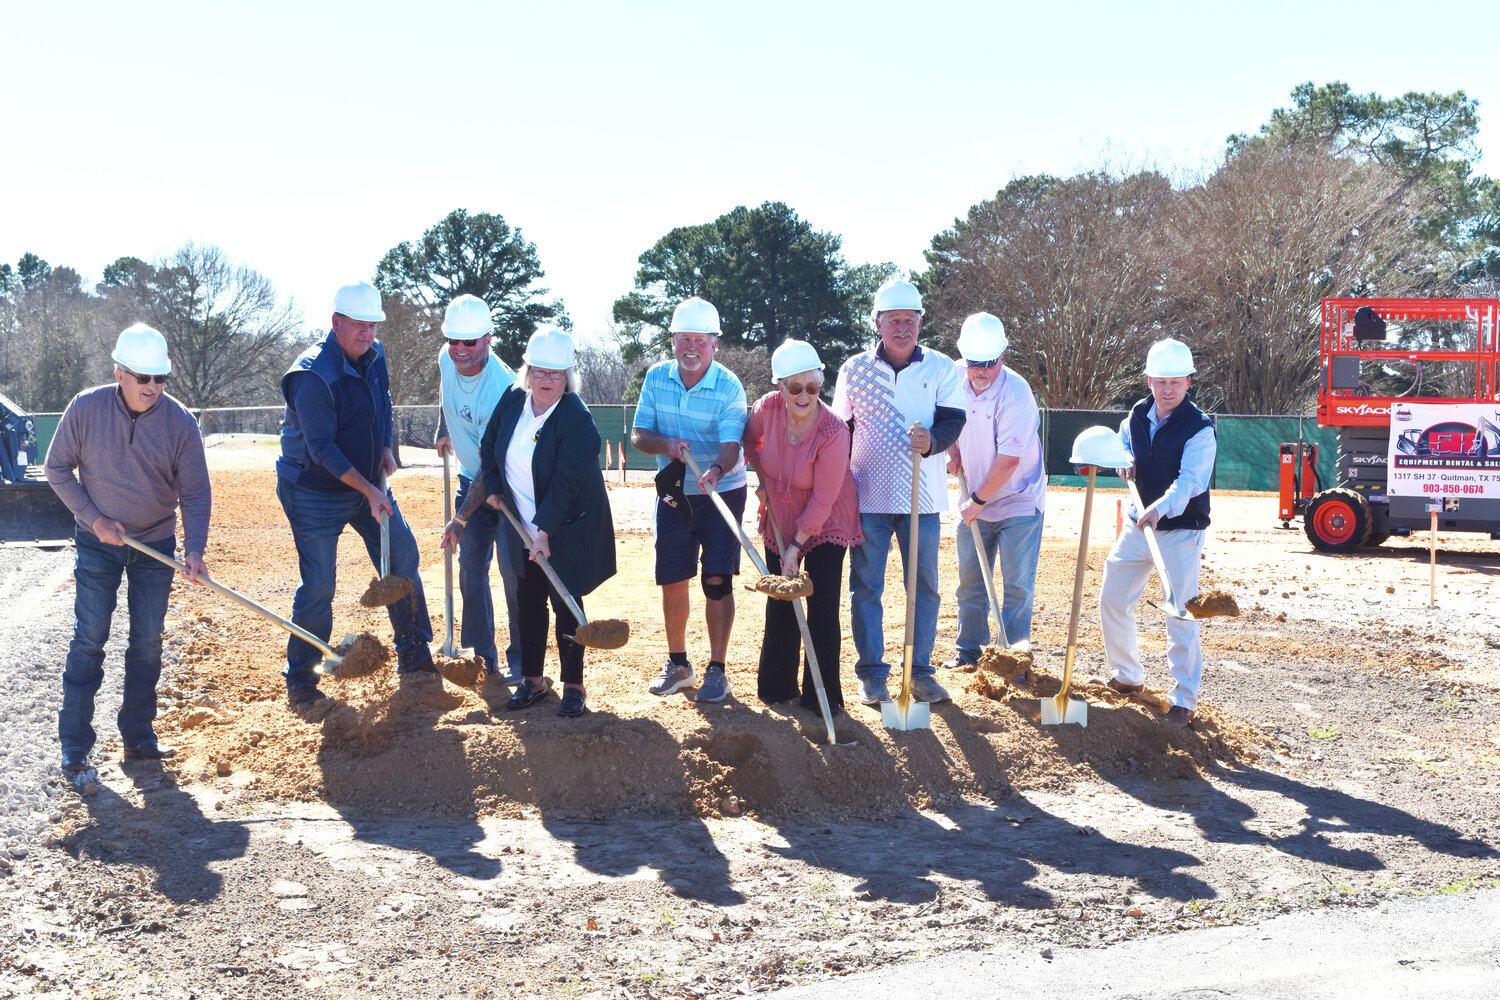 Ground was broken last Wednesday for the construction of a new clubhouse at the Mineola Country Club to replace the one that burned last August.